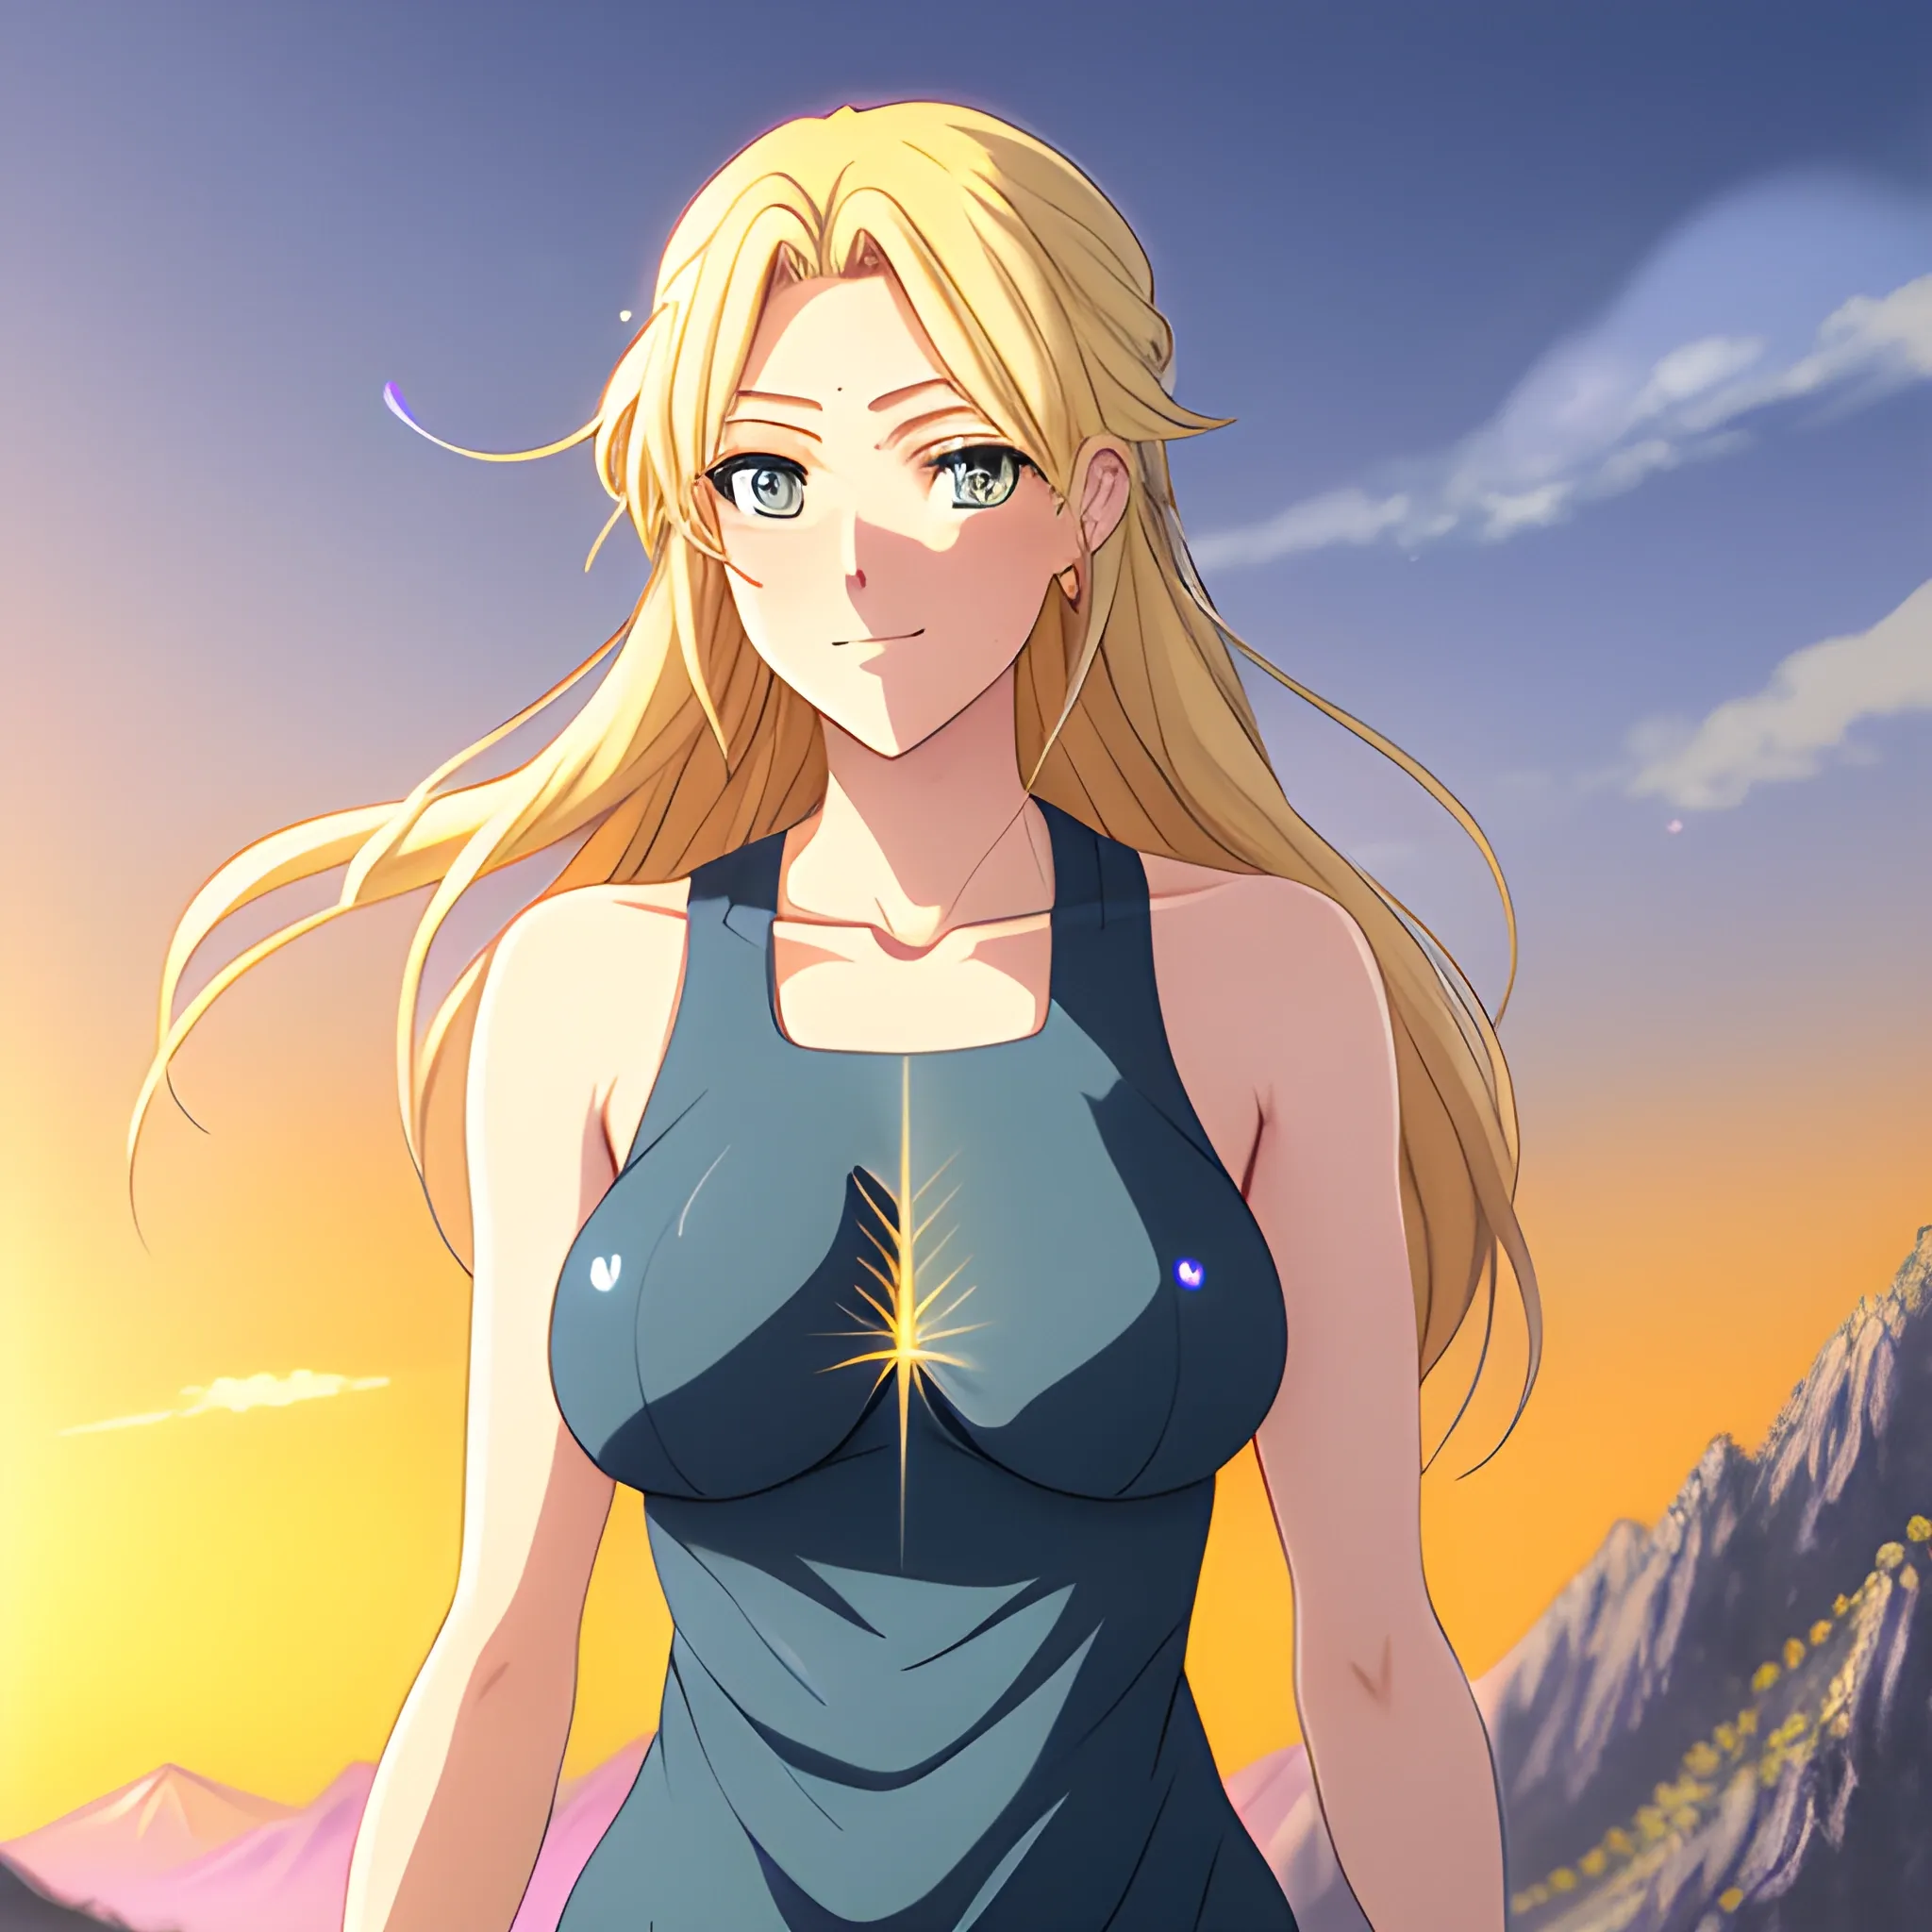 Anime art, cute young girl without breast, semi-long blond hair in motion, rosy cheeks, tender face, big watery blue eyes, looks sad face, tilted face, wearing a tank top not revealing, magical and luminous aura around herself, light cinematographic, volumetric light, highly detailed, magic fantasy orange sky in background with sunset, stars and rocky mountains in beginning of dusk, digital painting, 

size: 3048x3048